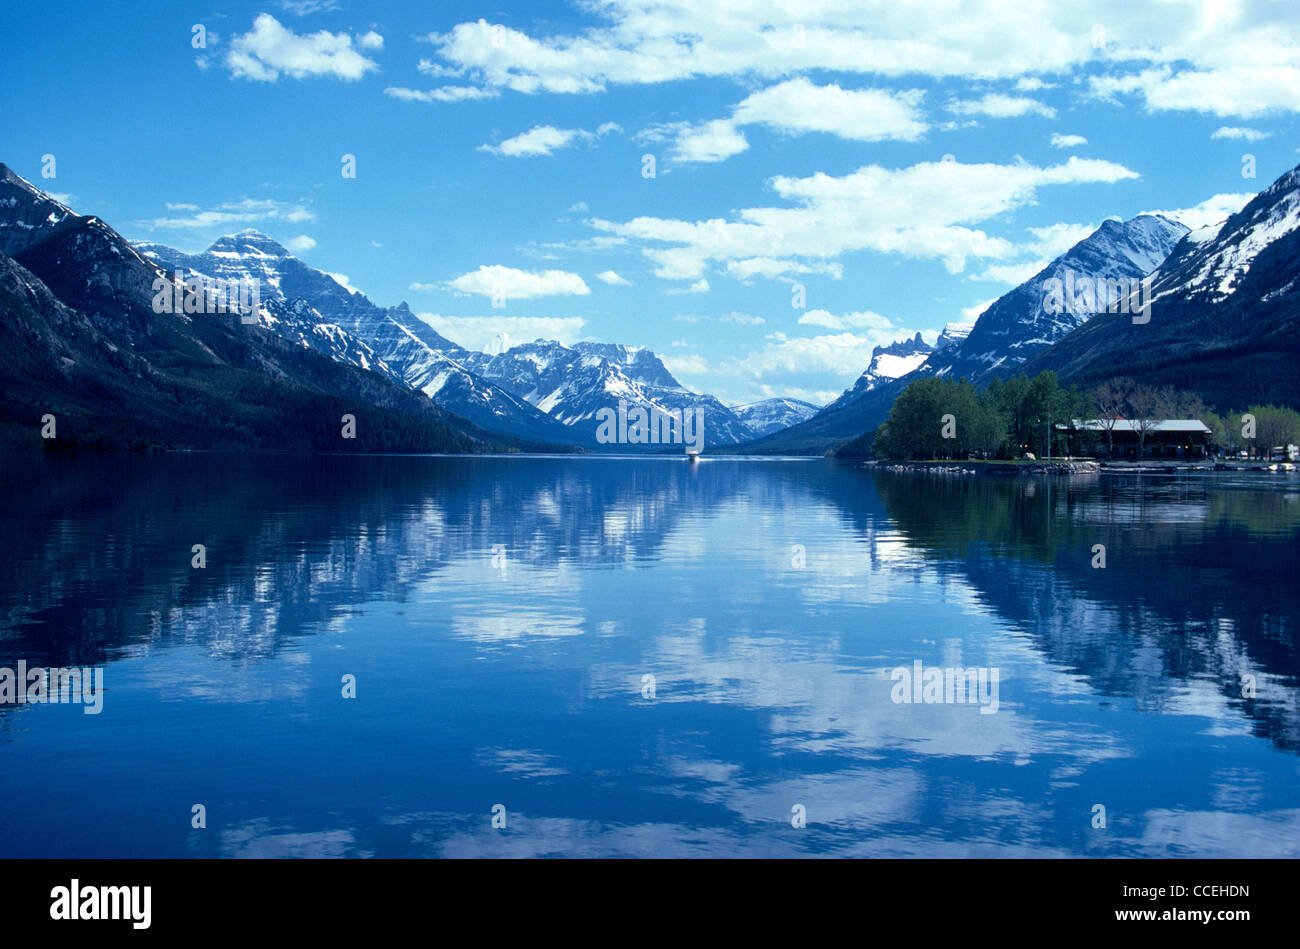 The Canadian Rocky Mountains surround peaceful lakes in Waterton Lakes National Park in Alberta, Canada. Stock Photo